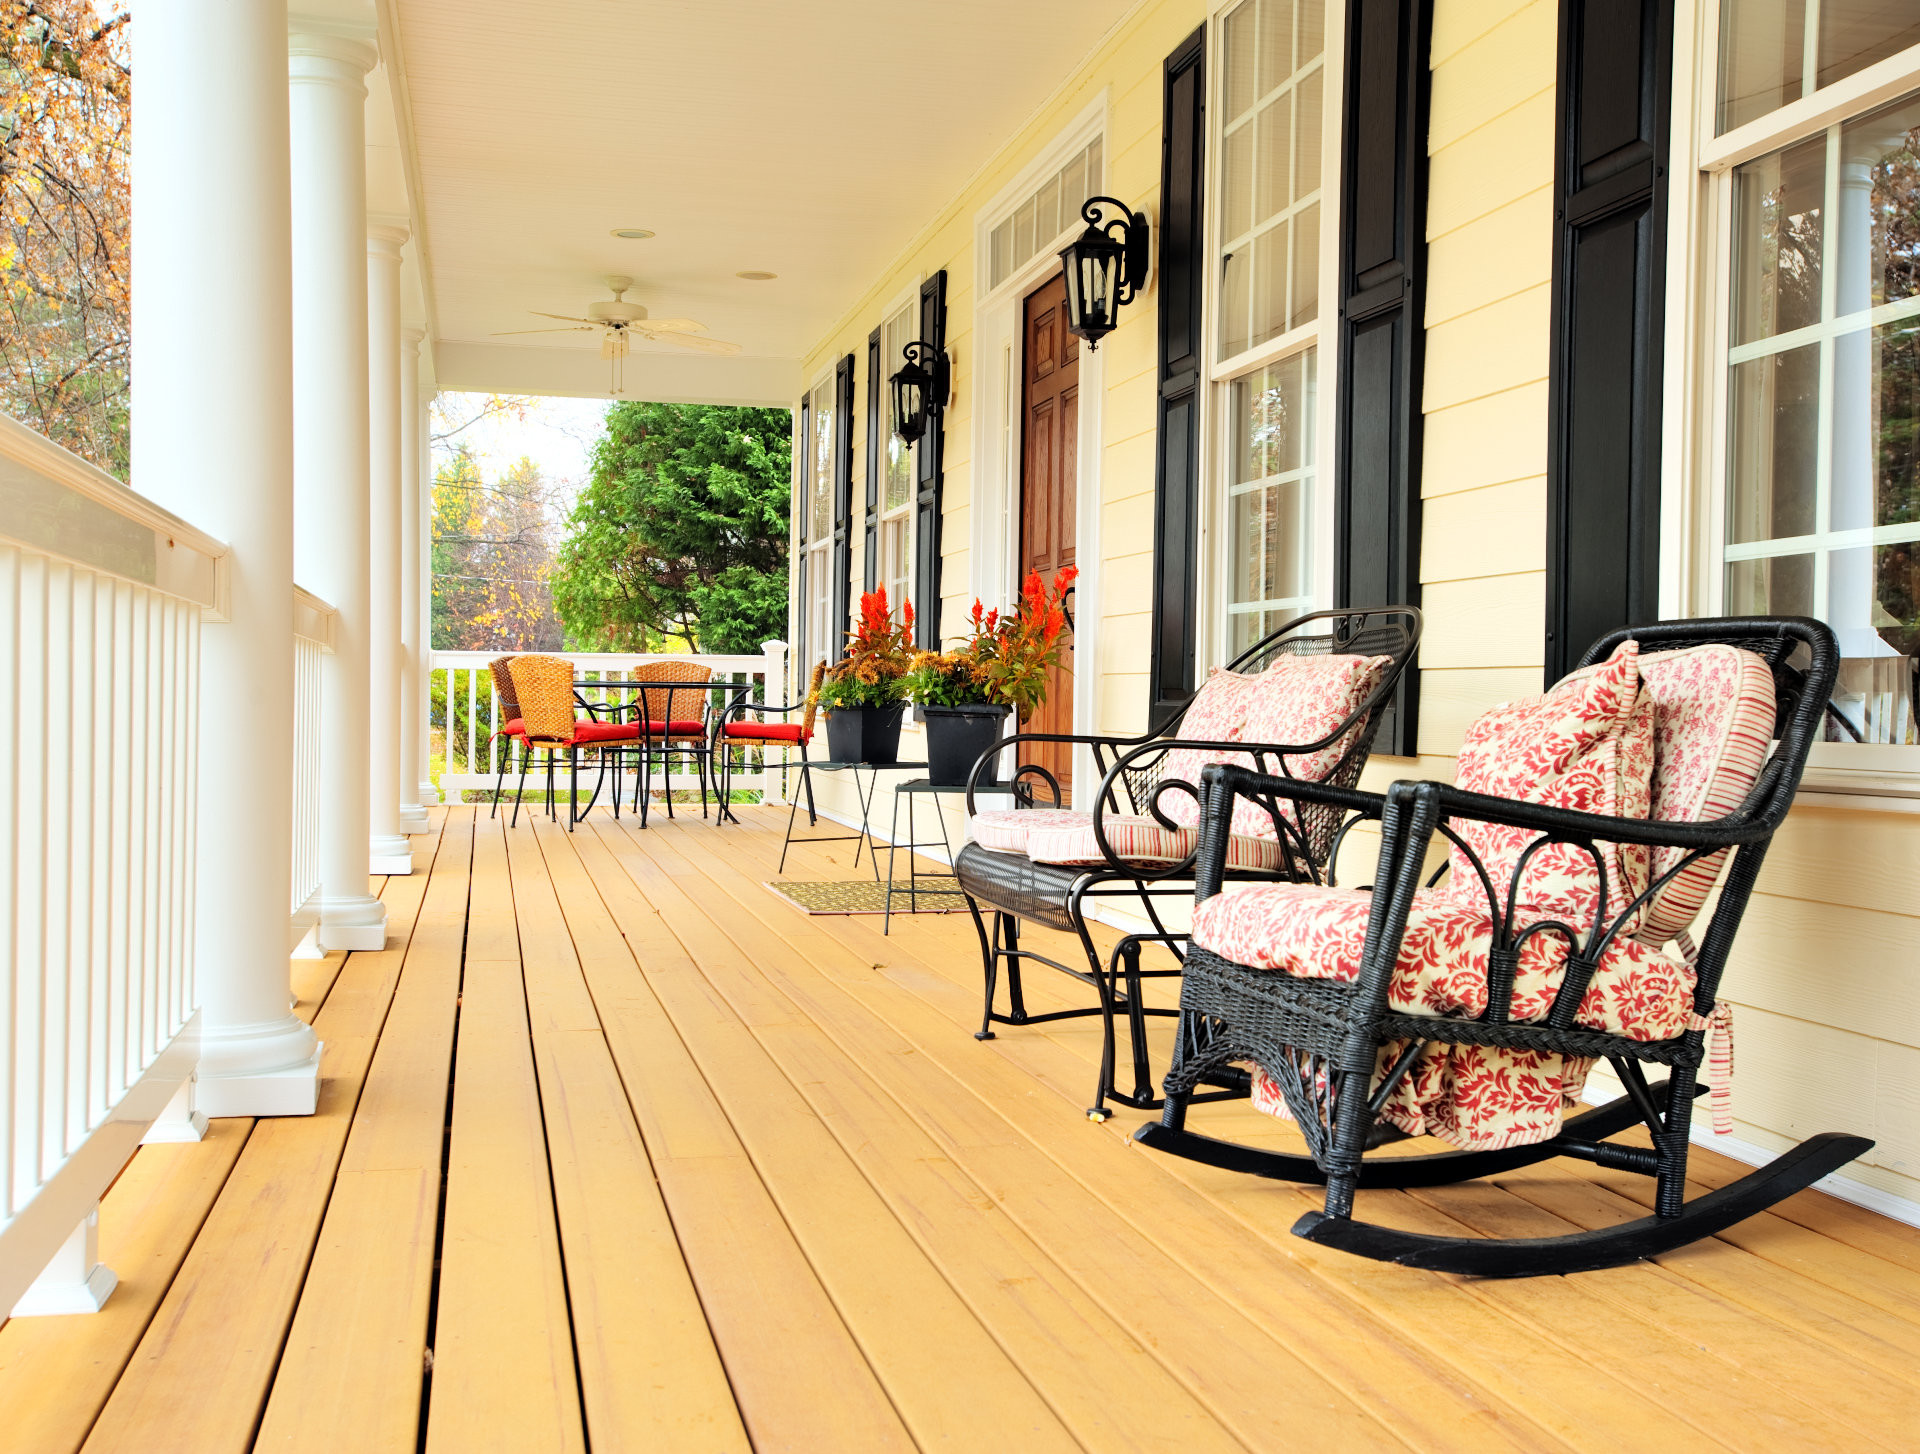 12 Lovable Allegheny Mountain Hardwood Flooring Emlenton Pa 2024 free download allegheny mountain hardwood flooring emlenton pa of search bonnie guevin within bigstock front porch of traditional hom 6891921